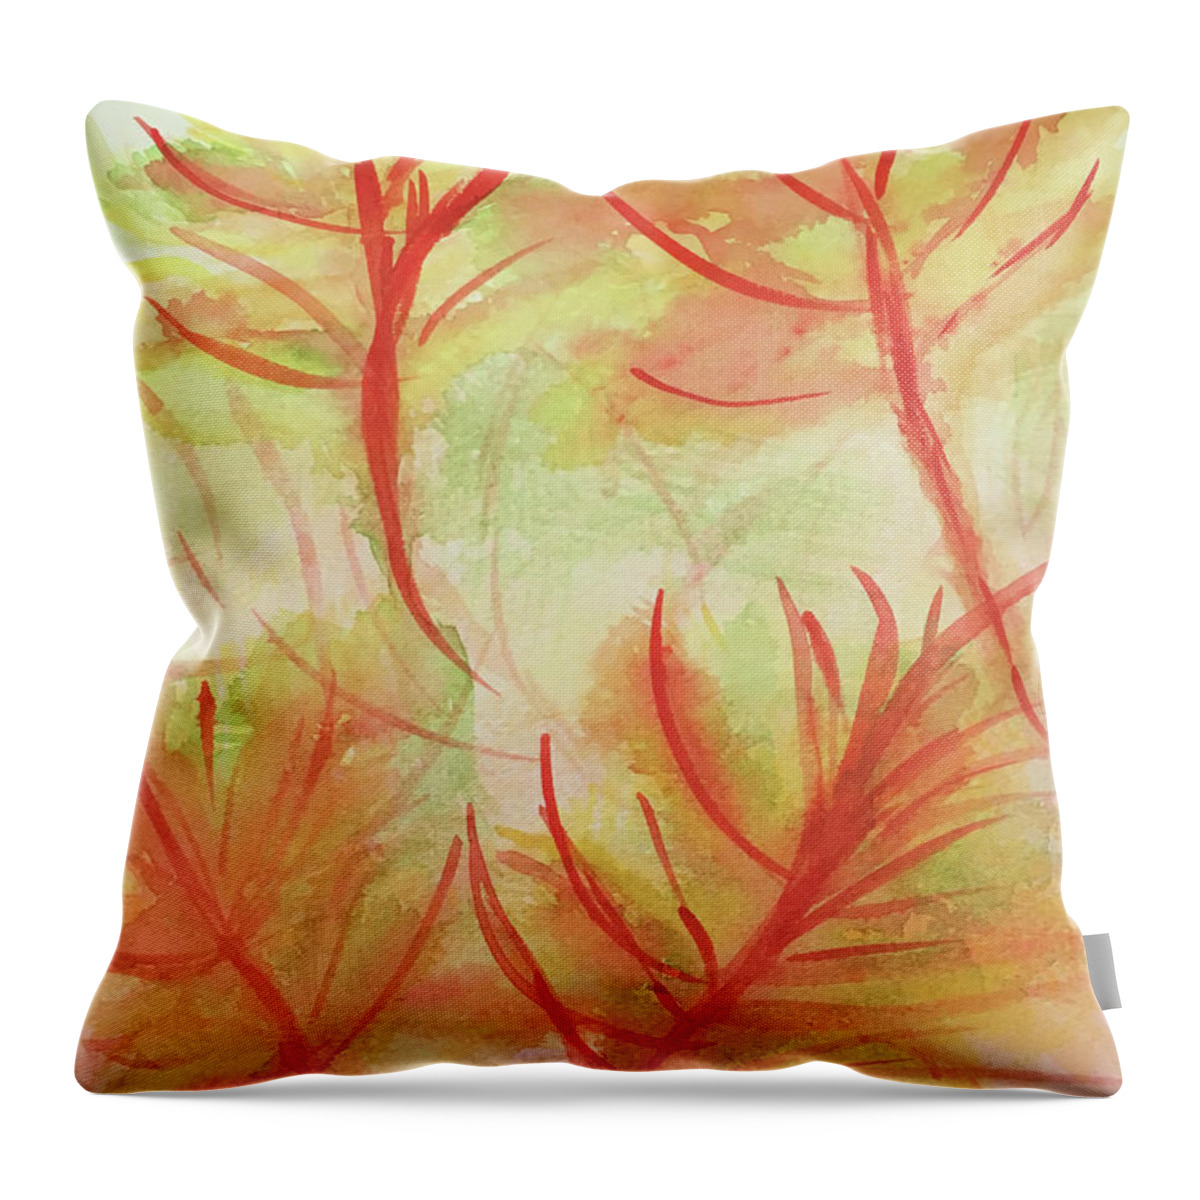 Fall Season Collection By Annette M Stevenson Throw Pillow featuring the painting Orange Fanciful Leaves by Annette M Stevenson